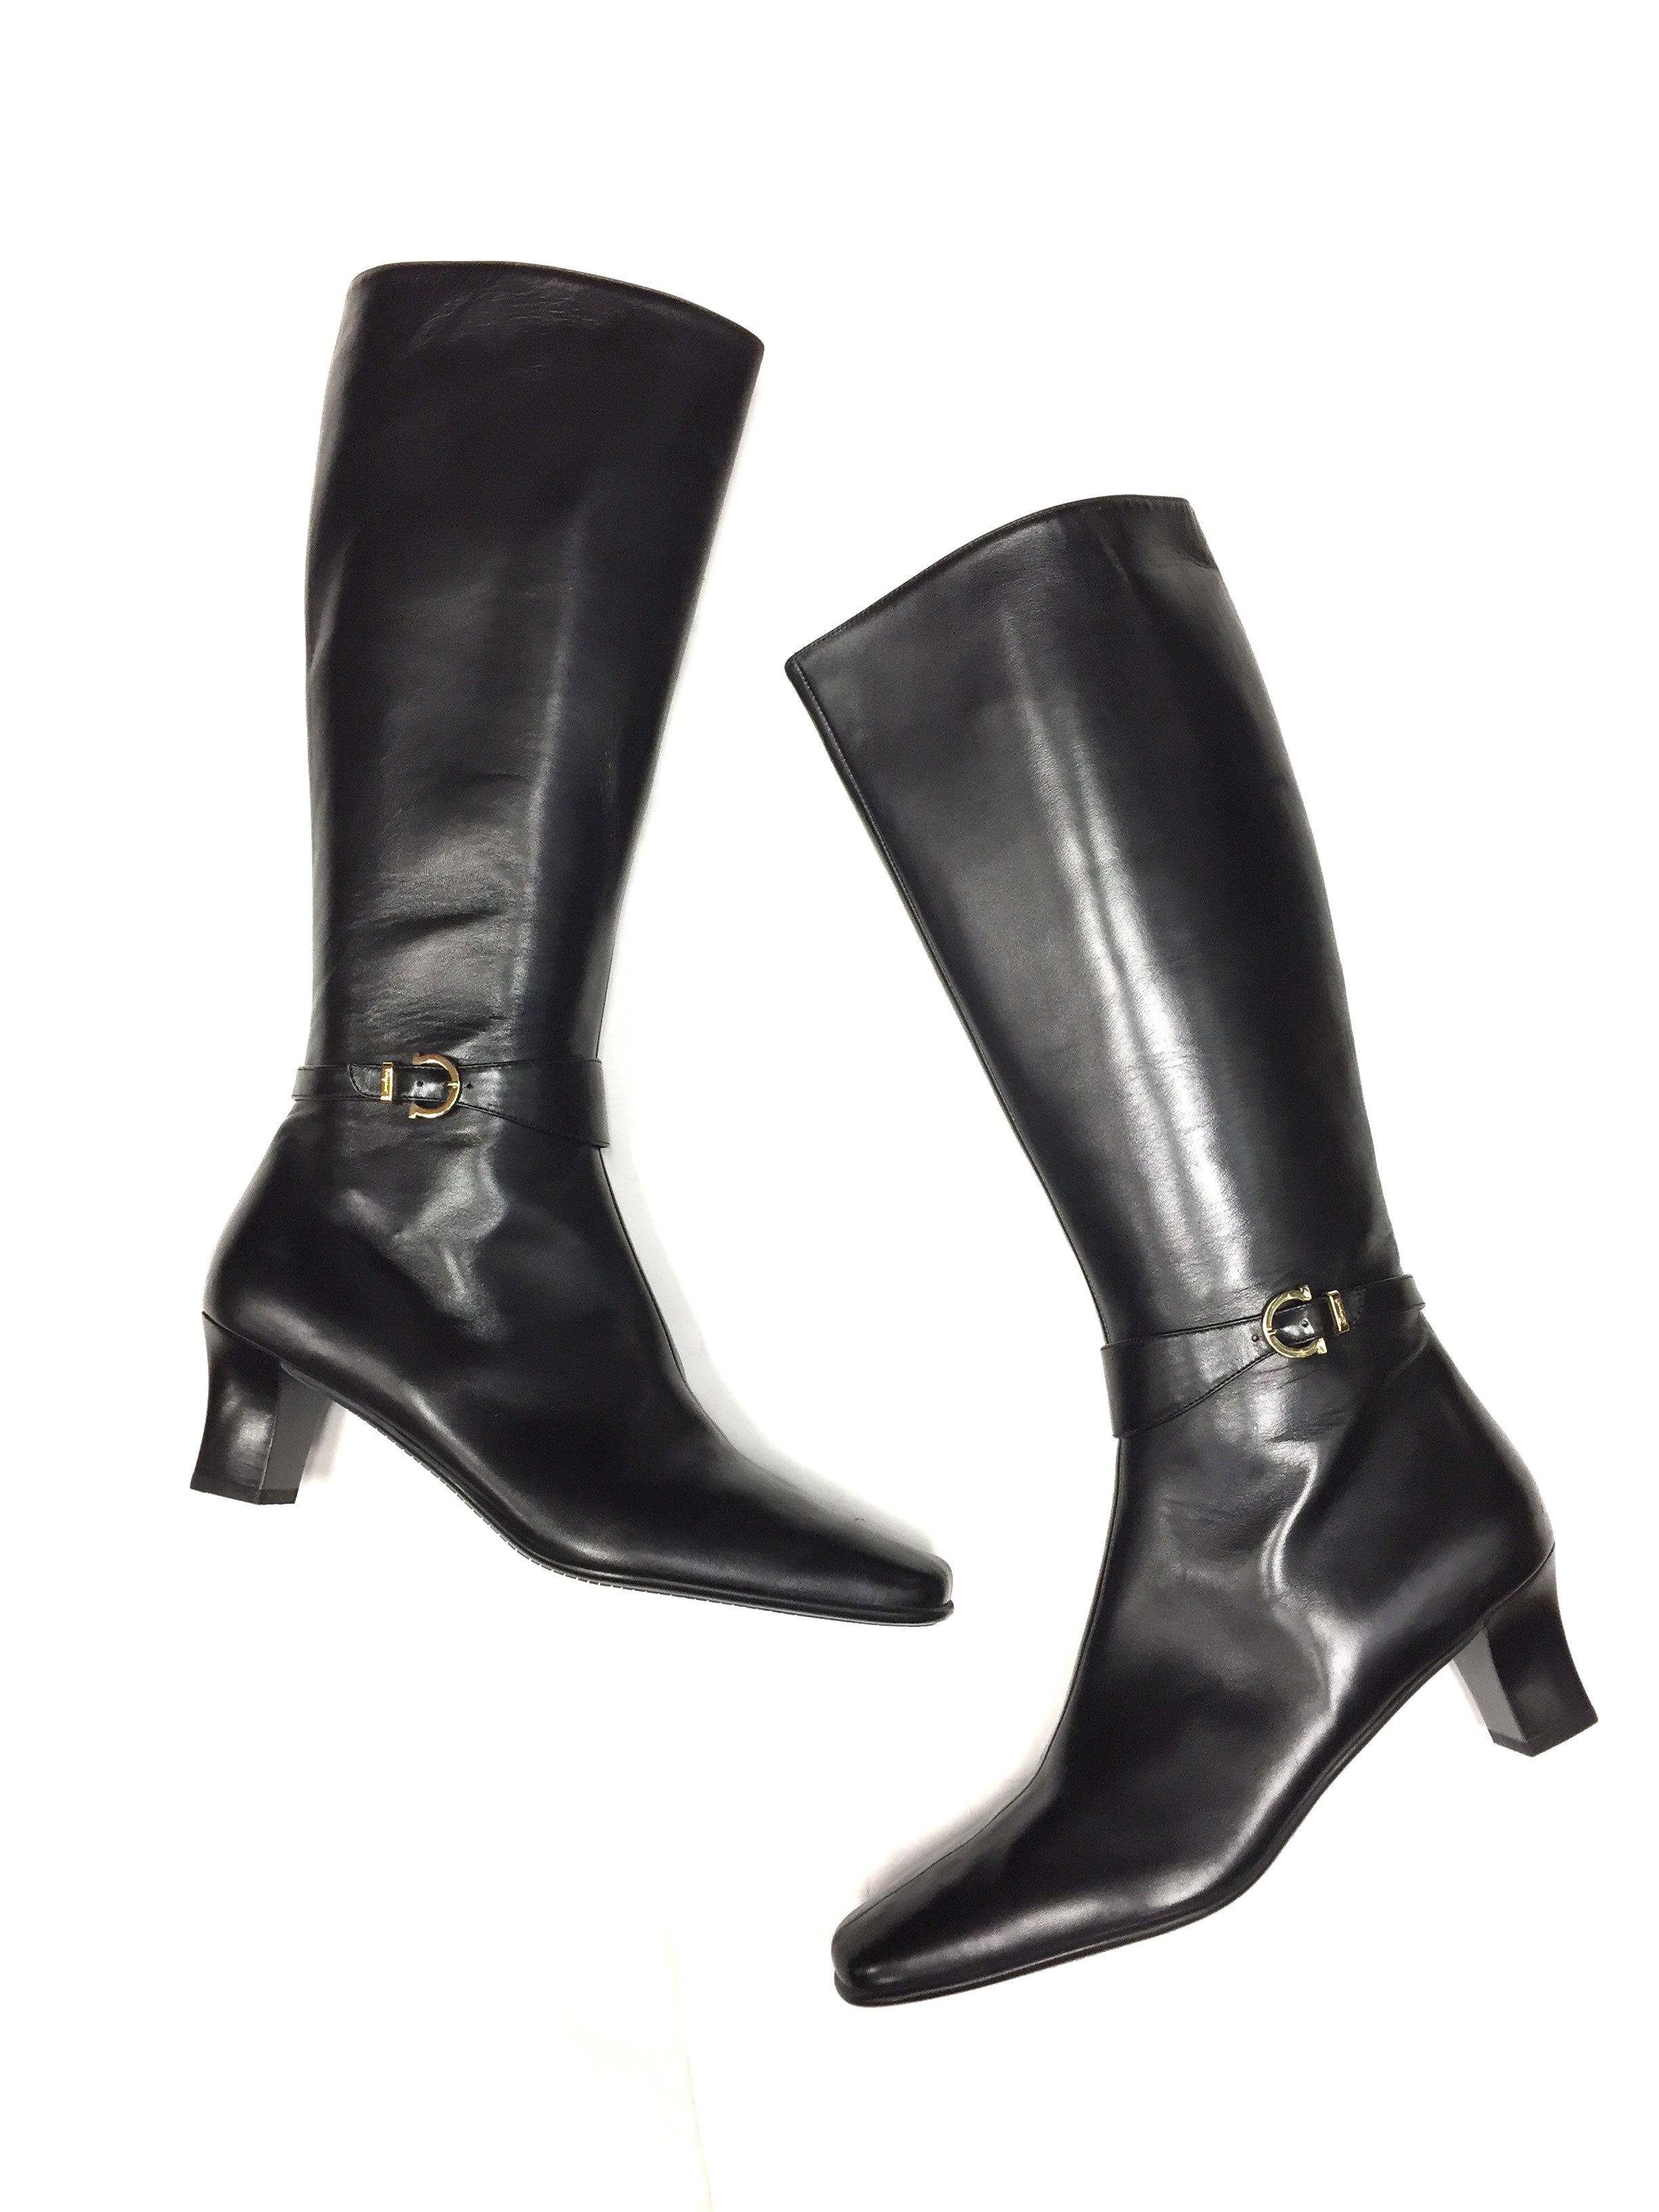 tall black leather boots with low heel